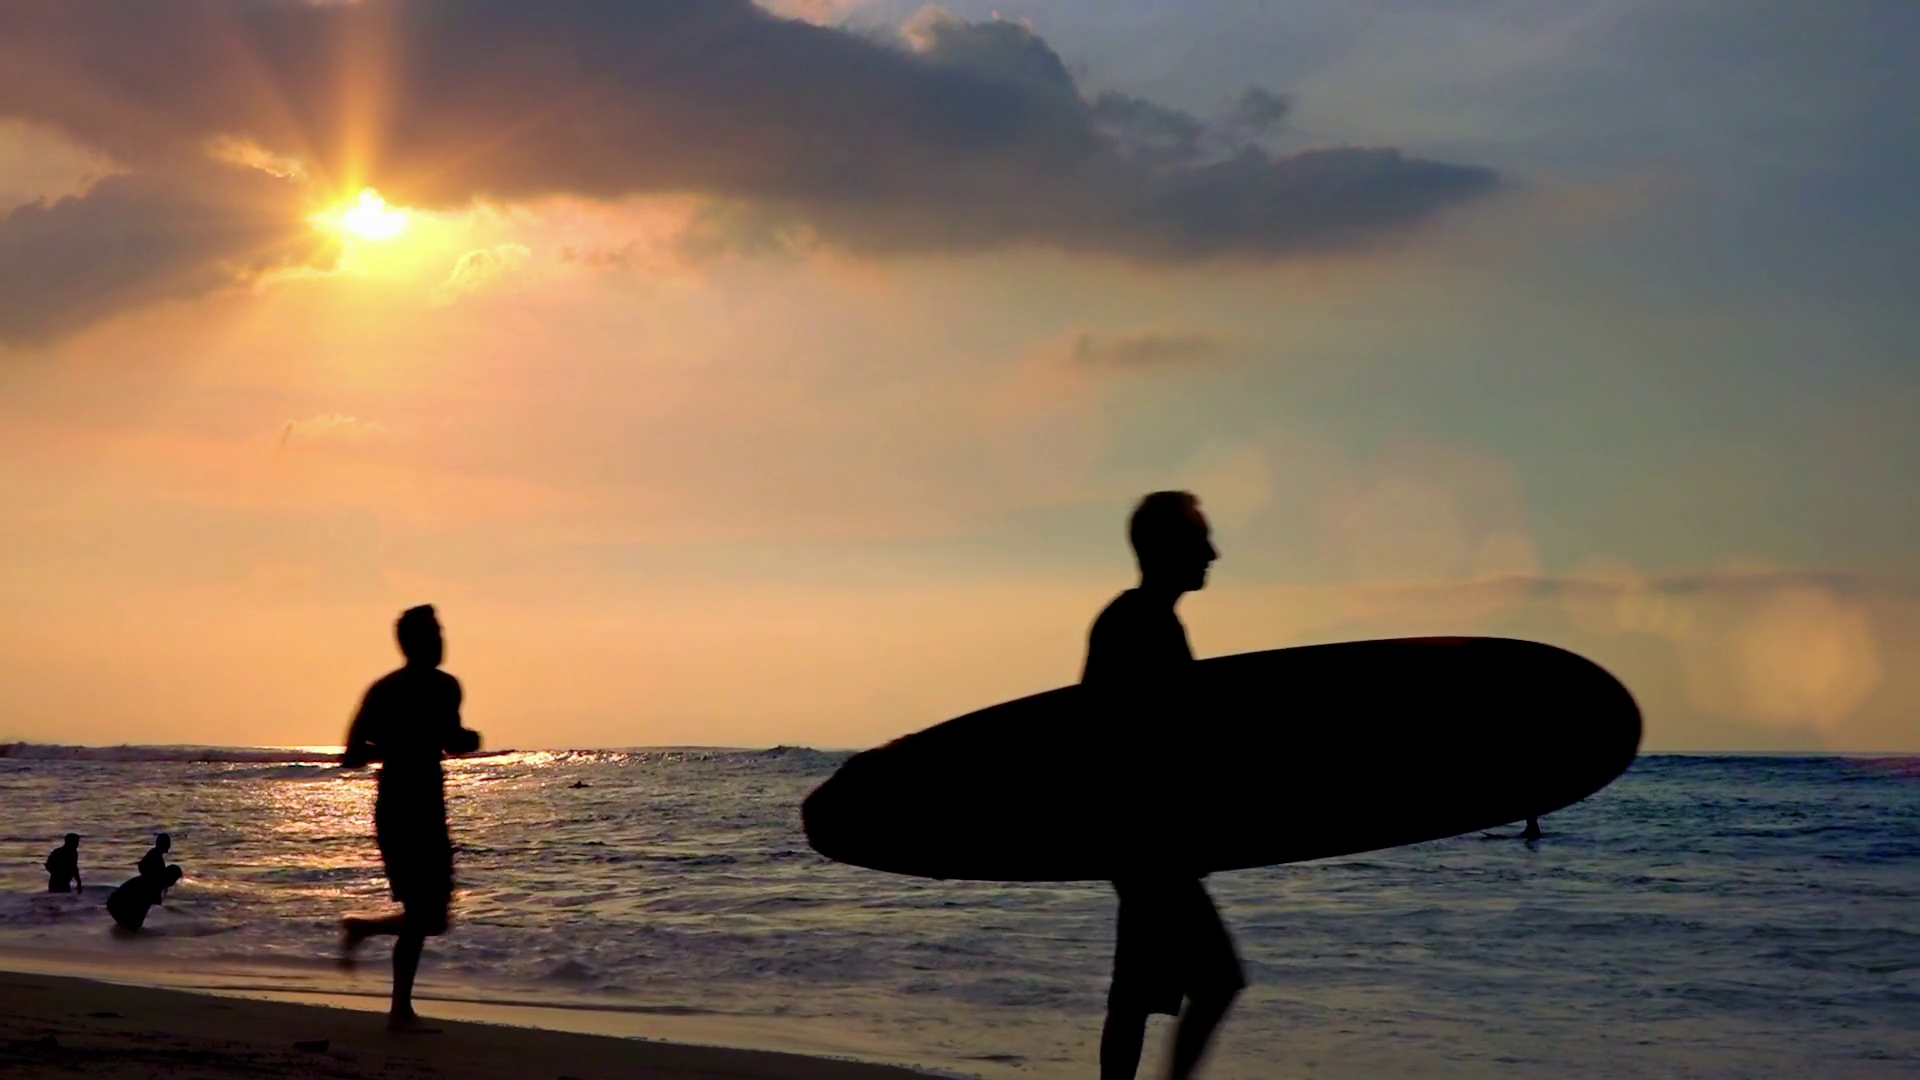 Silhouettes of surfer carrying surfboard and man running along ...